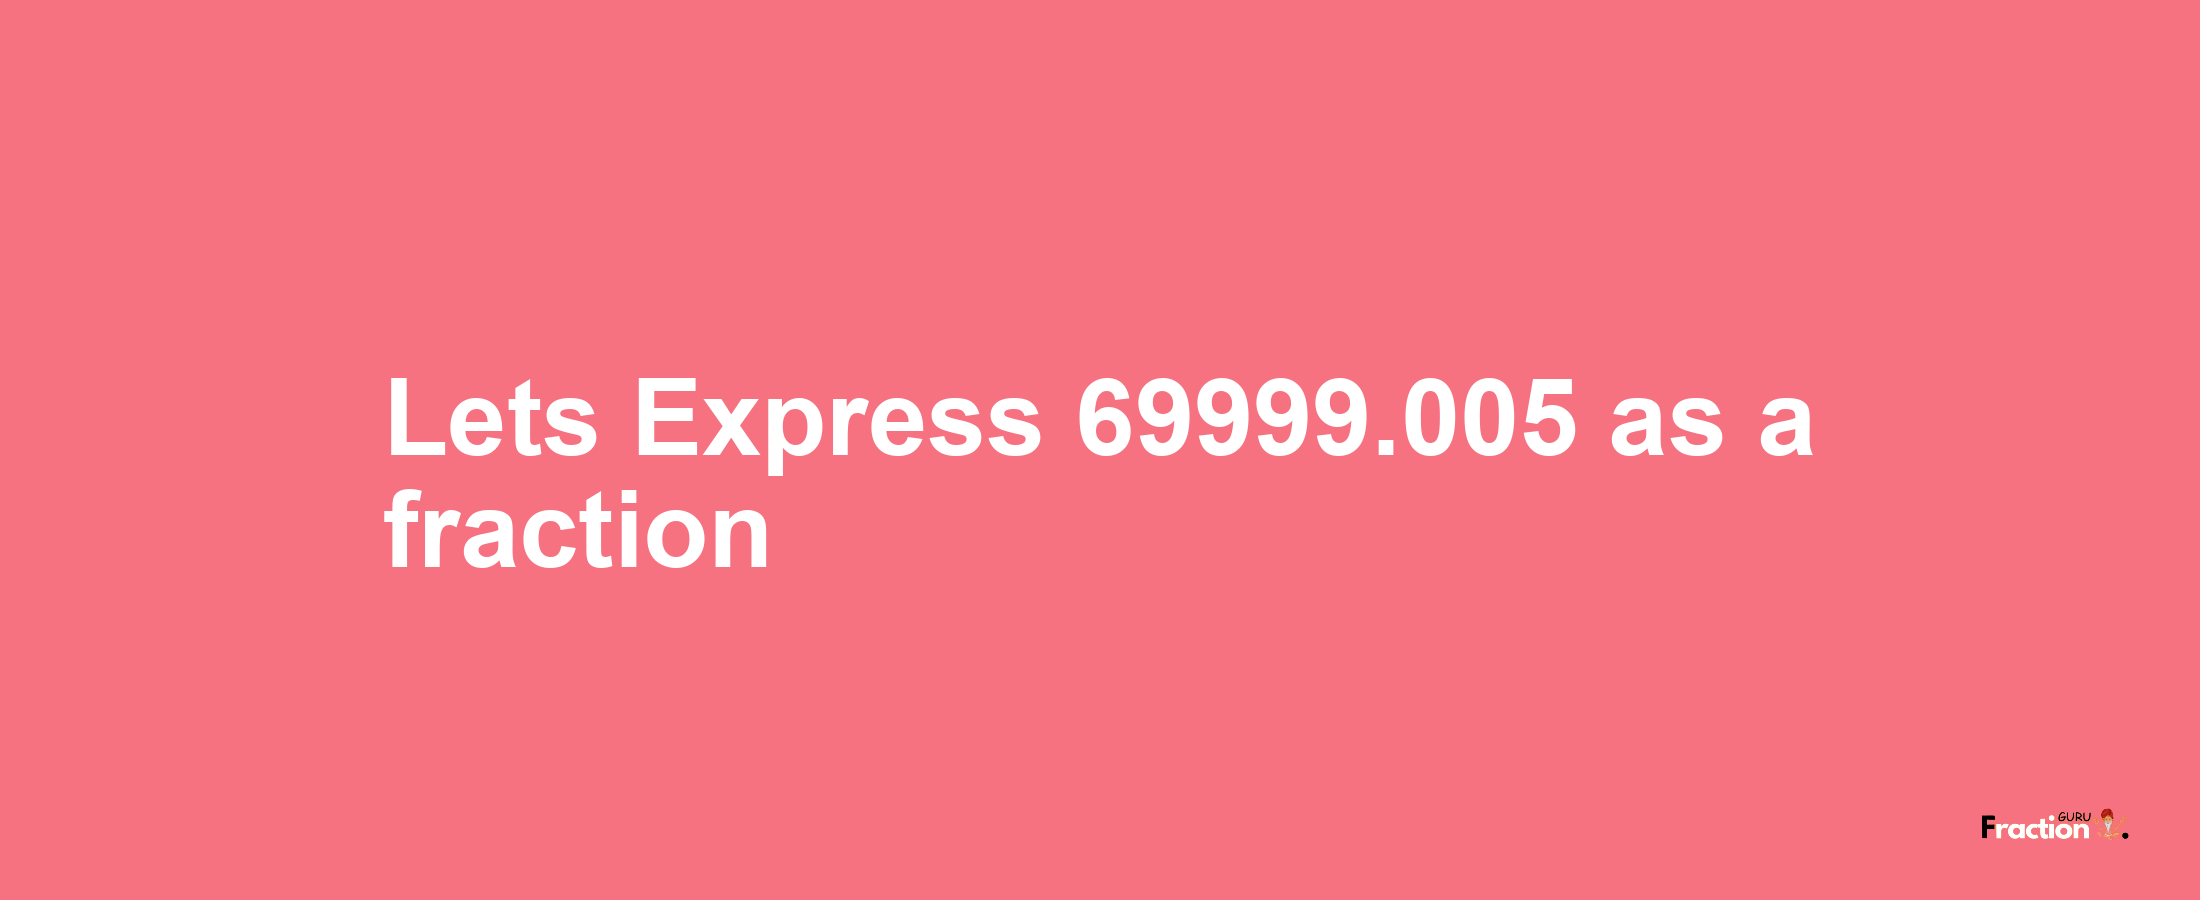 Lets Express 69999.005 as afraction